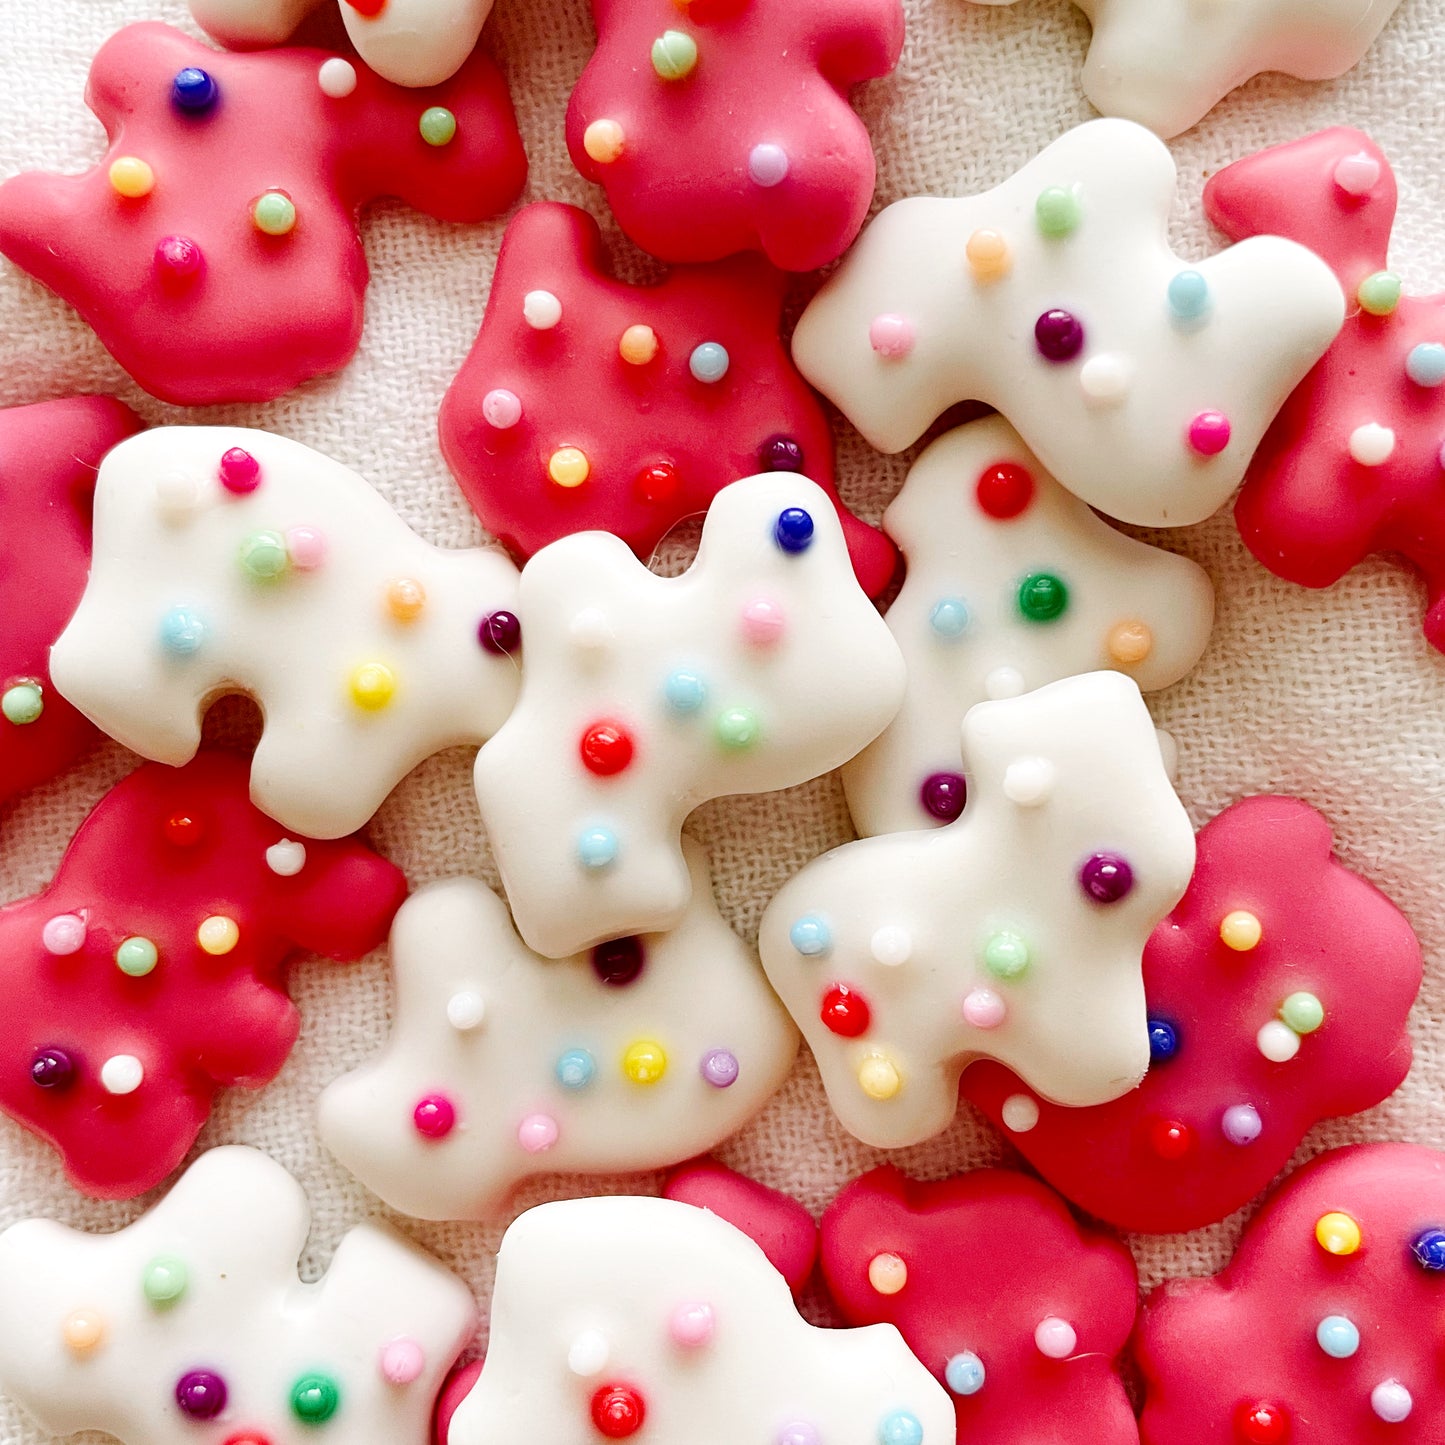 Frosted Animal Cookie Dangles